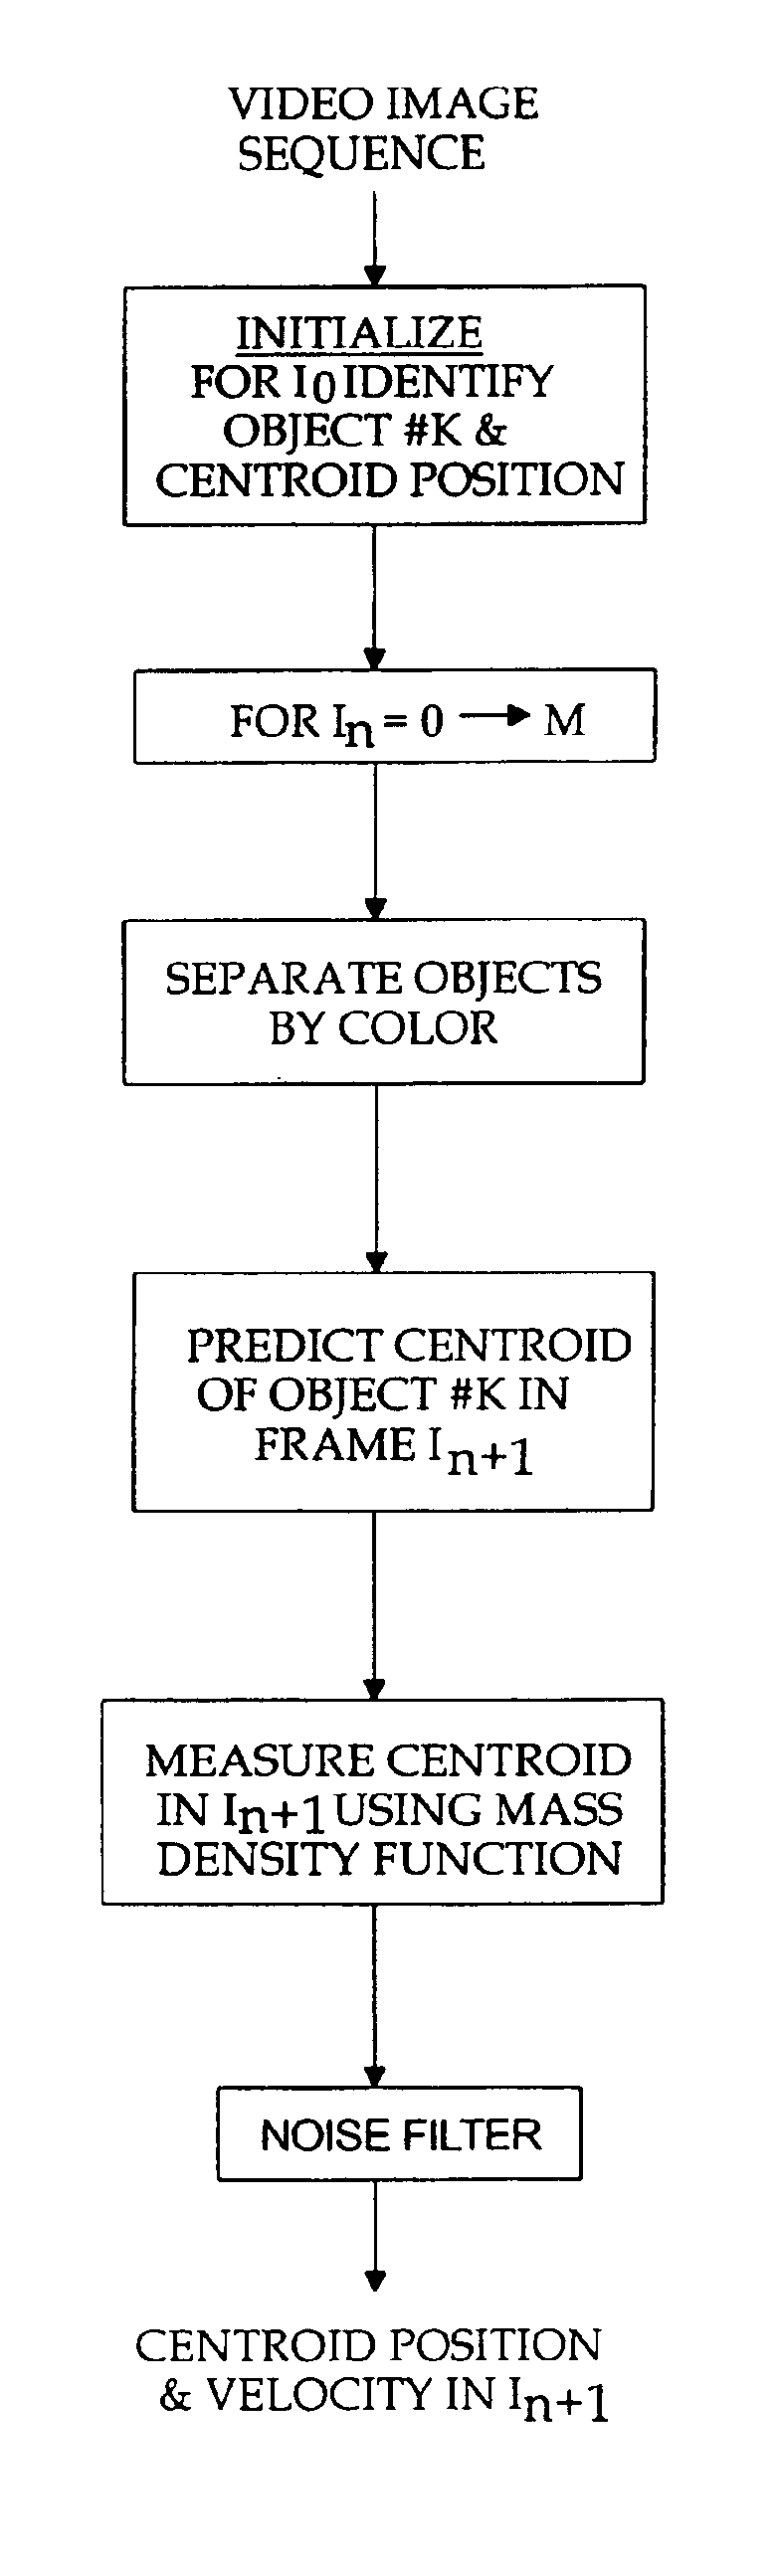 Kalman tracking of color objects